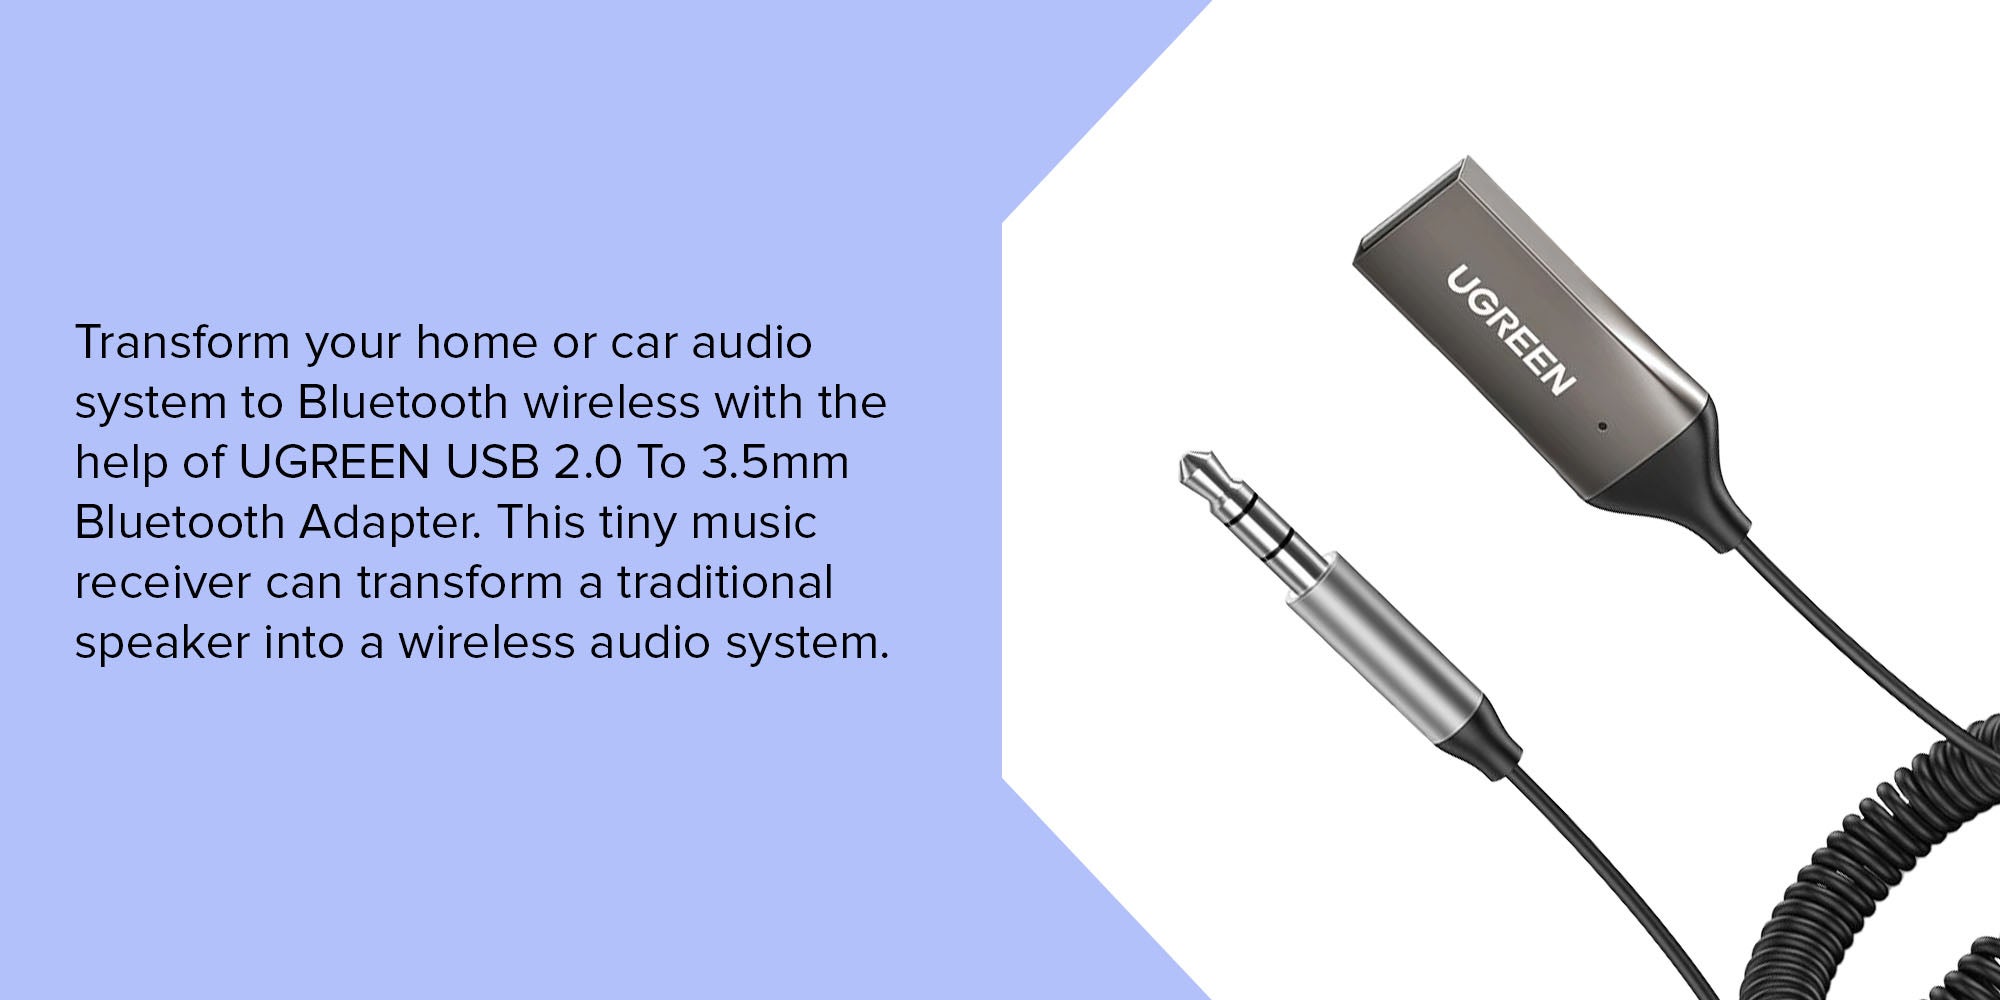 Ugreen Bluetooth Car Receiver Bluetooth version 5.3 Transmission range 10m  - USB 2.0 to 3.5mm Jack Handsfree Car kit Audio Receiver with Built-in  Microphone for Car Speaker and Home Audio 70601 Grey